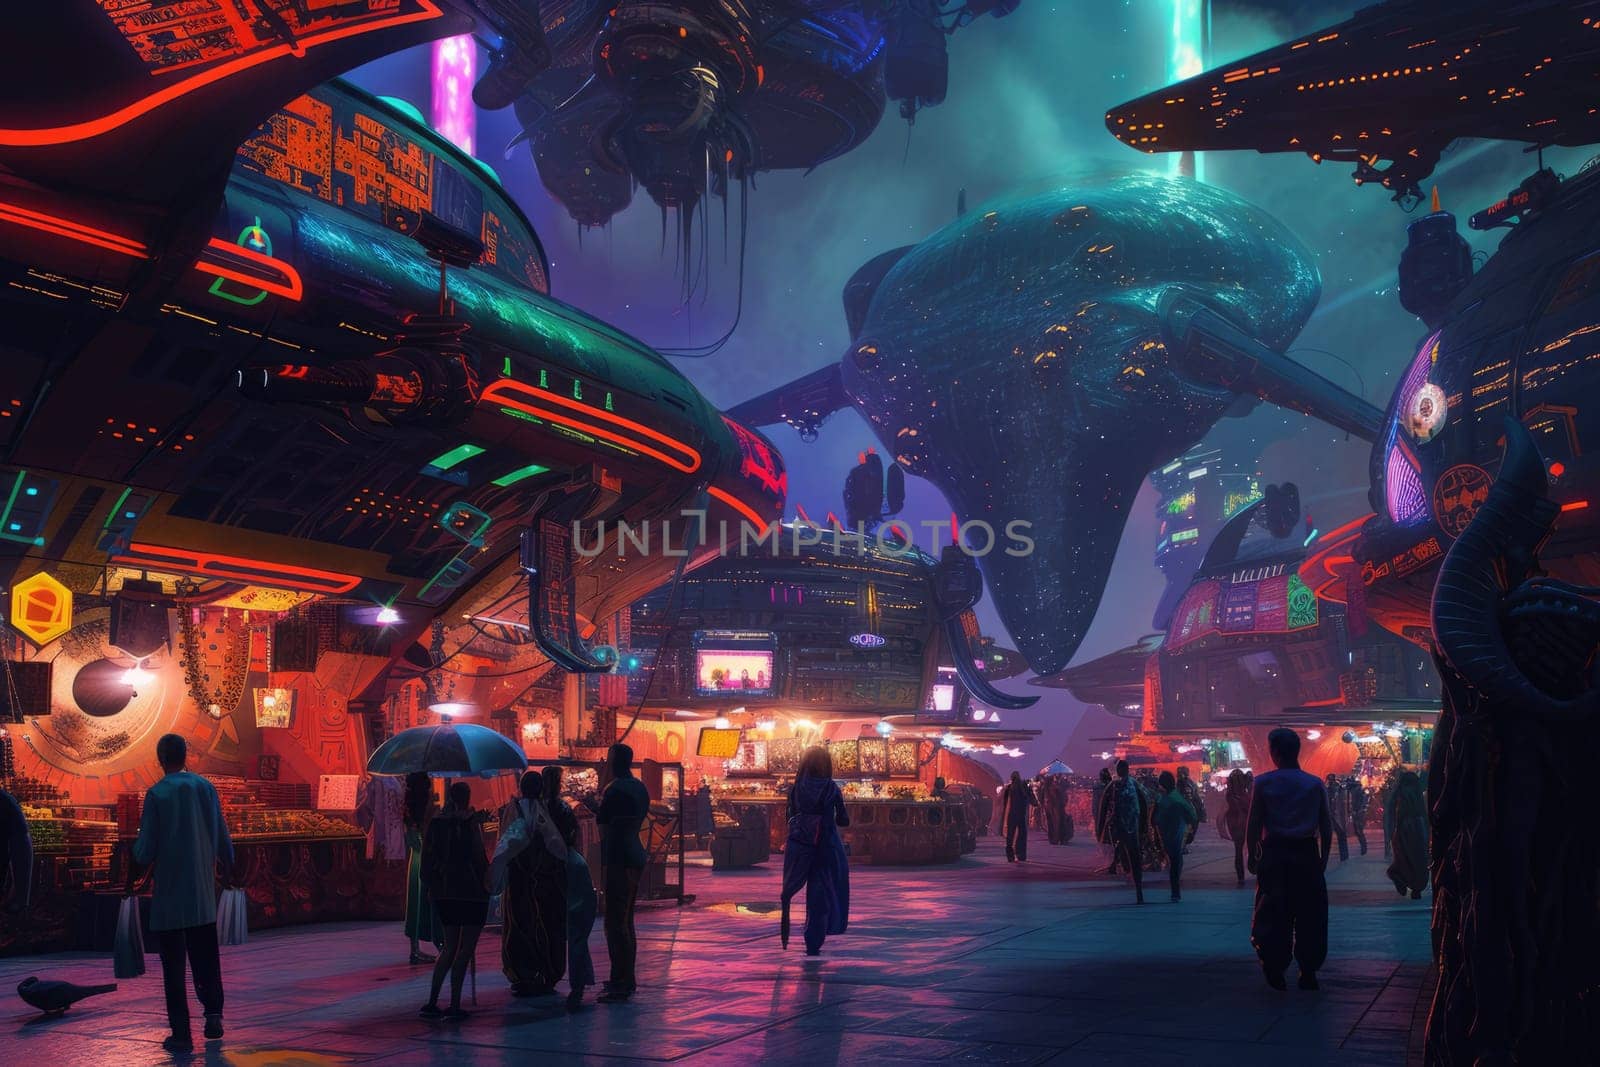 Futuristic Cityscape with Flying Vehicles and Crowds. Resplendent. by biancoblue